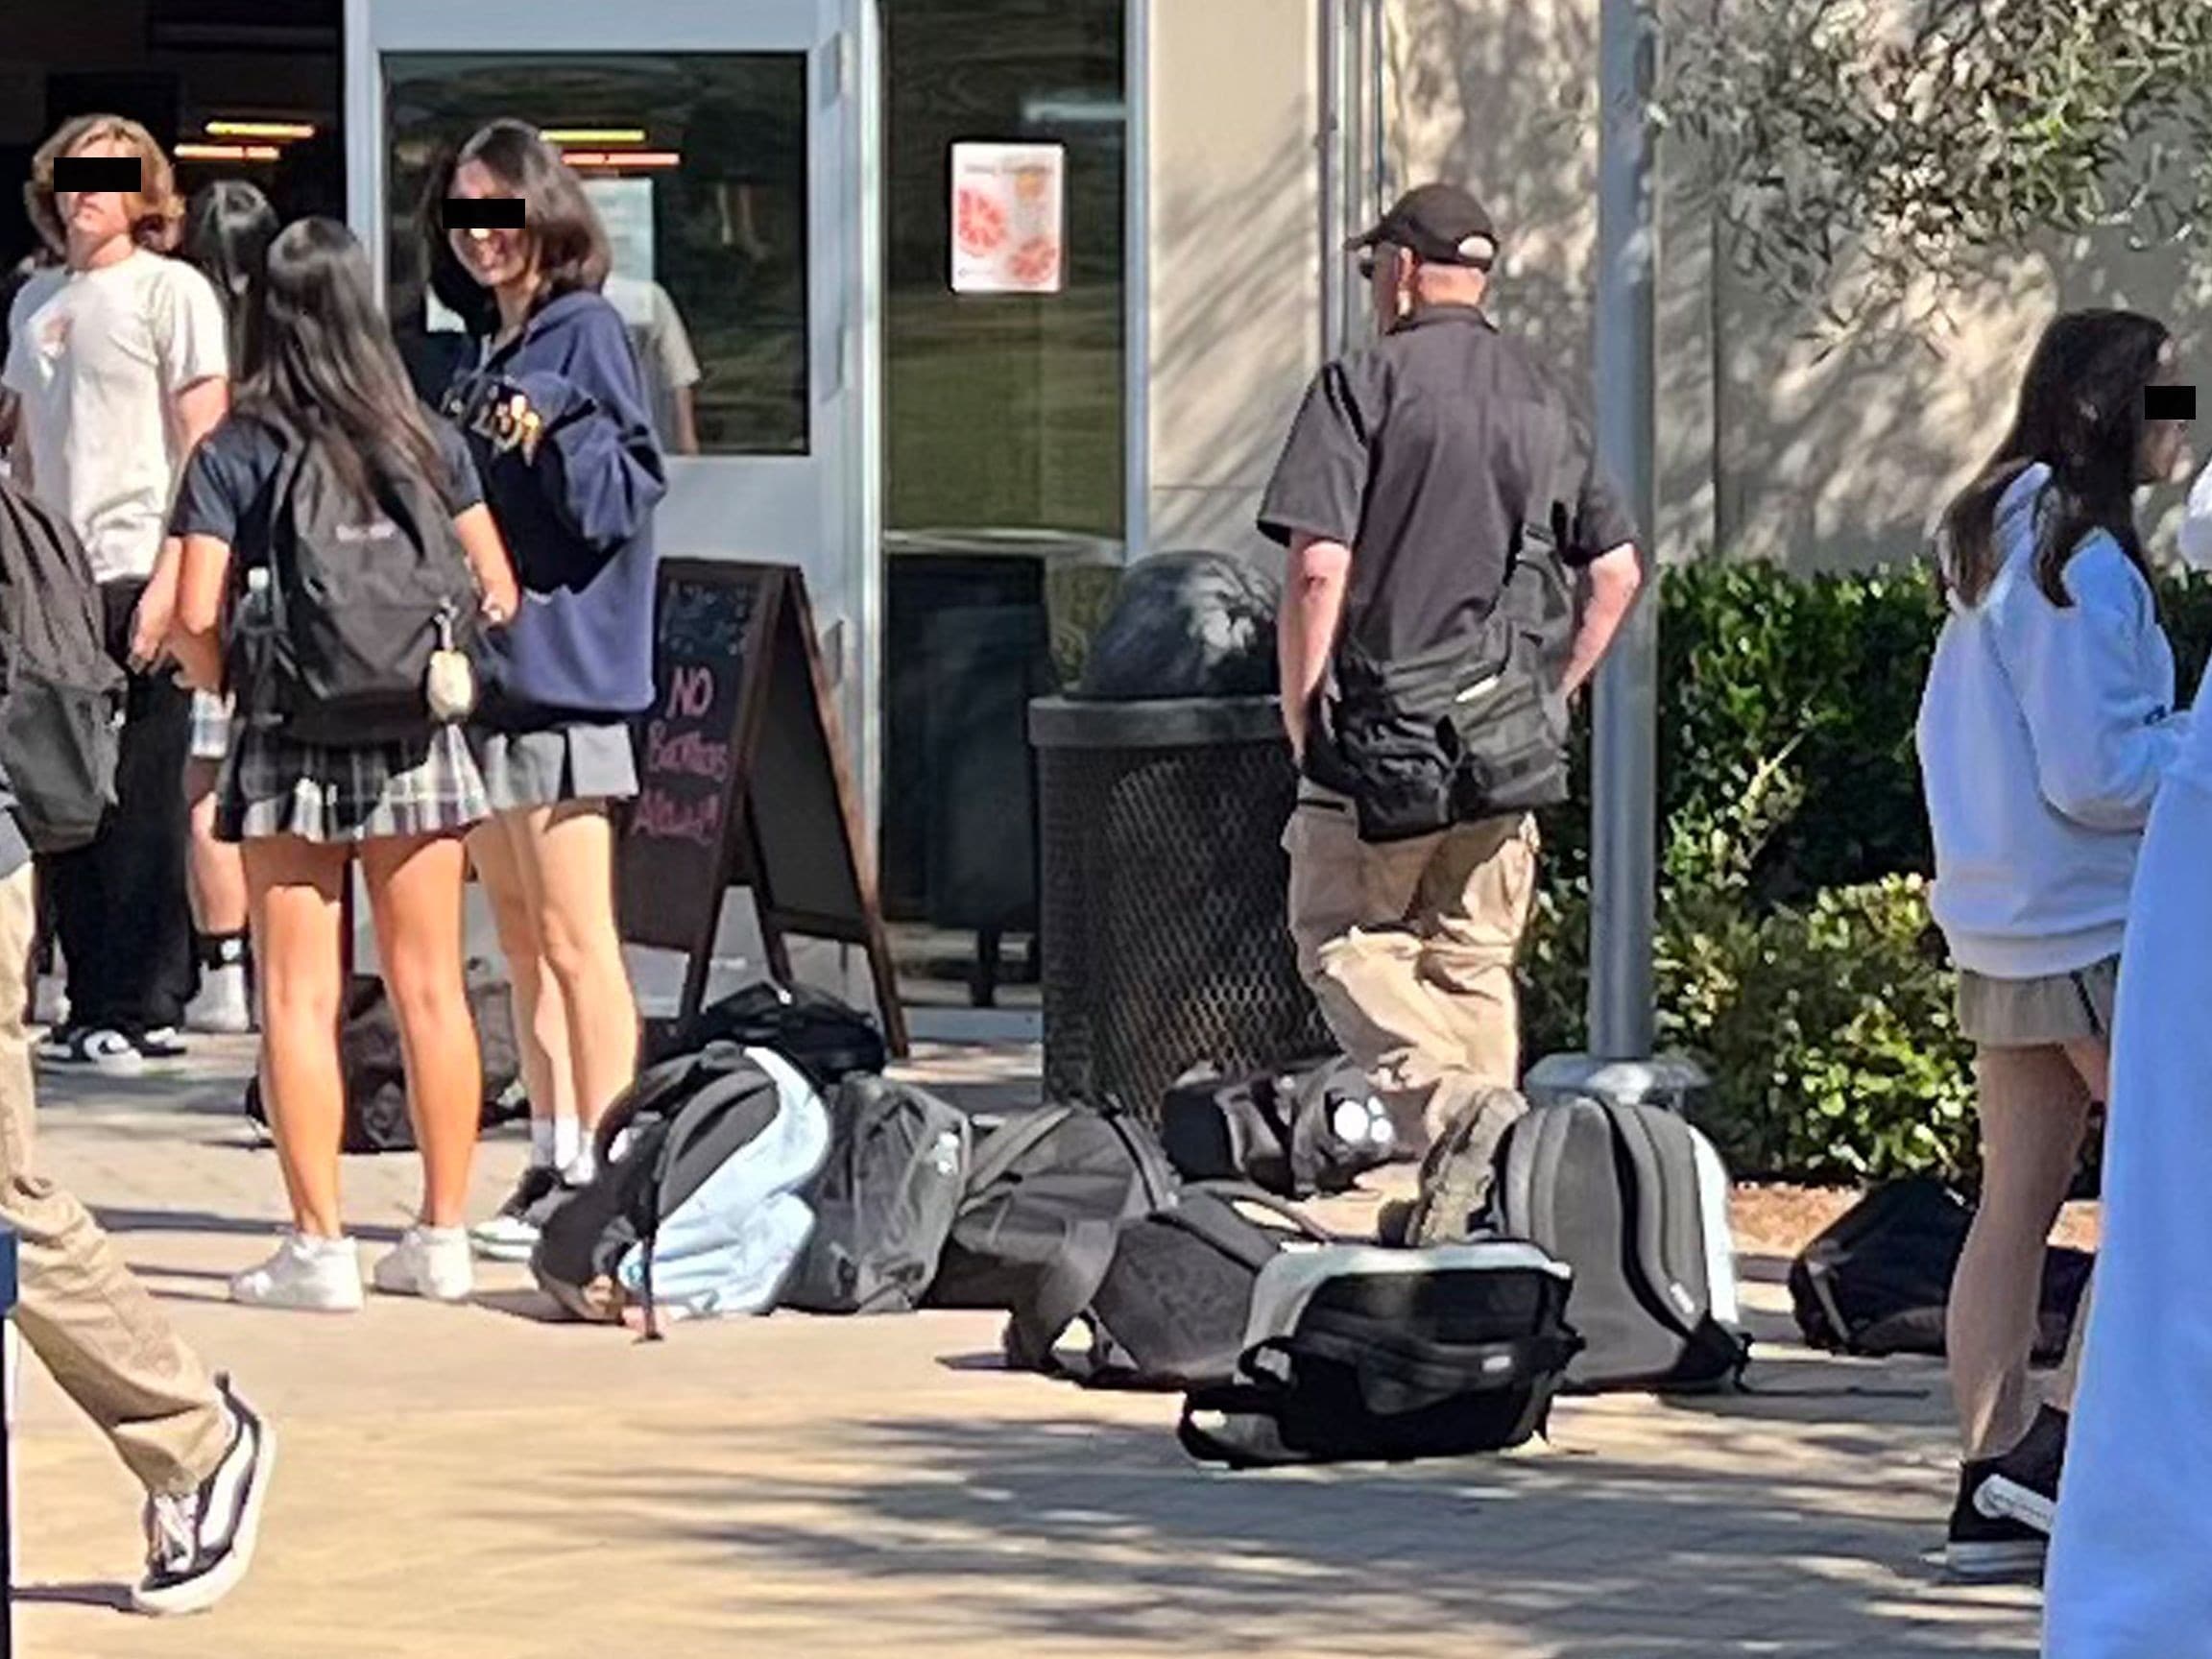 Jim is walking among high schools students, undercover and armed, in case of an active shooter or terrorist attack. He worked full time for six months here.